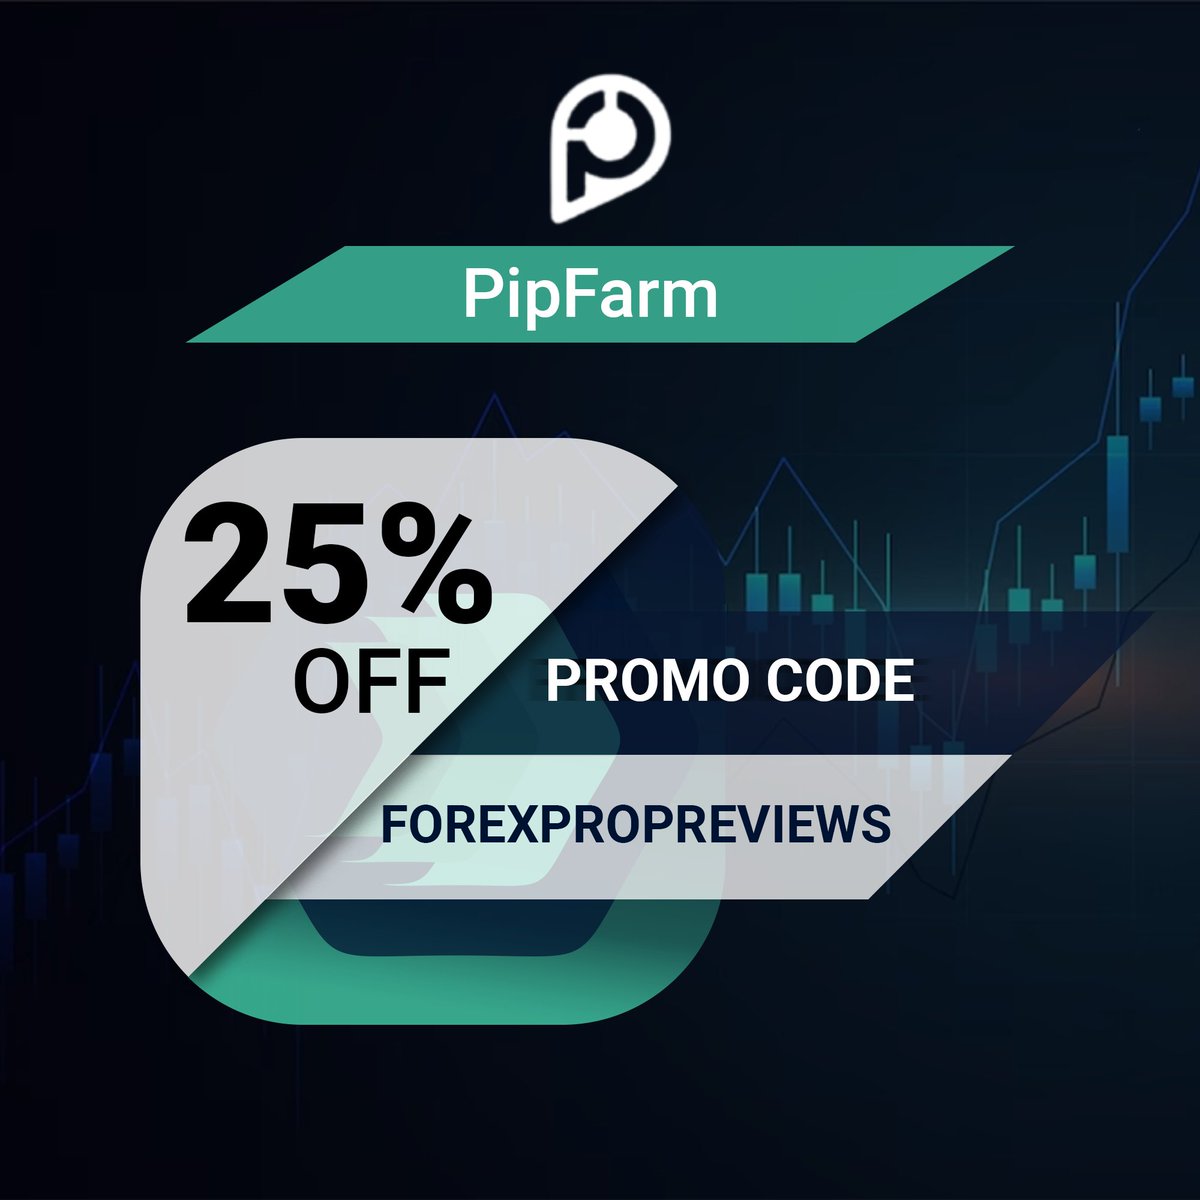 🌟 Don't miss out on this amazing opportunity from PipFarm! Get a 25% discount using code 'forexpropreviews'. Find more amazing discounts on our website and elevate your trading game with us! 🚀  
#PipFarm #ExclusiveDiscount #Forex #PropFirm